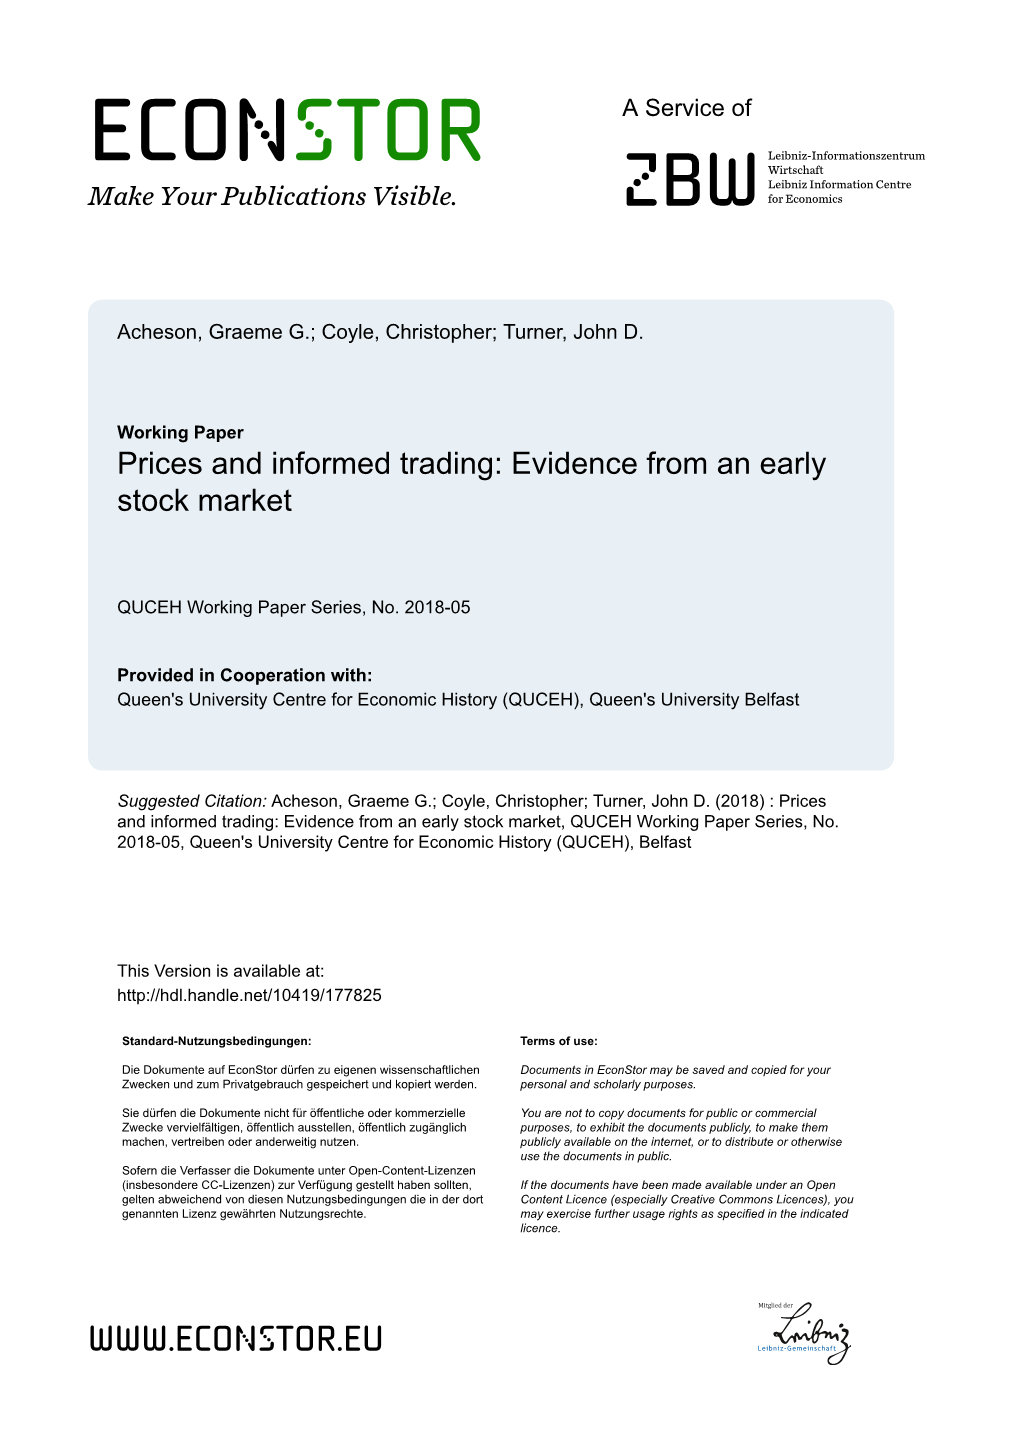 Prices and Informed Trading: Evidence from an Early Stock Market